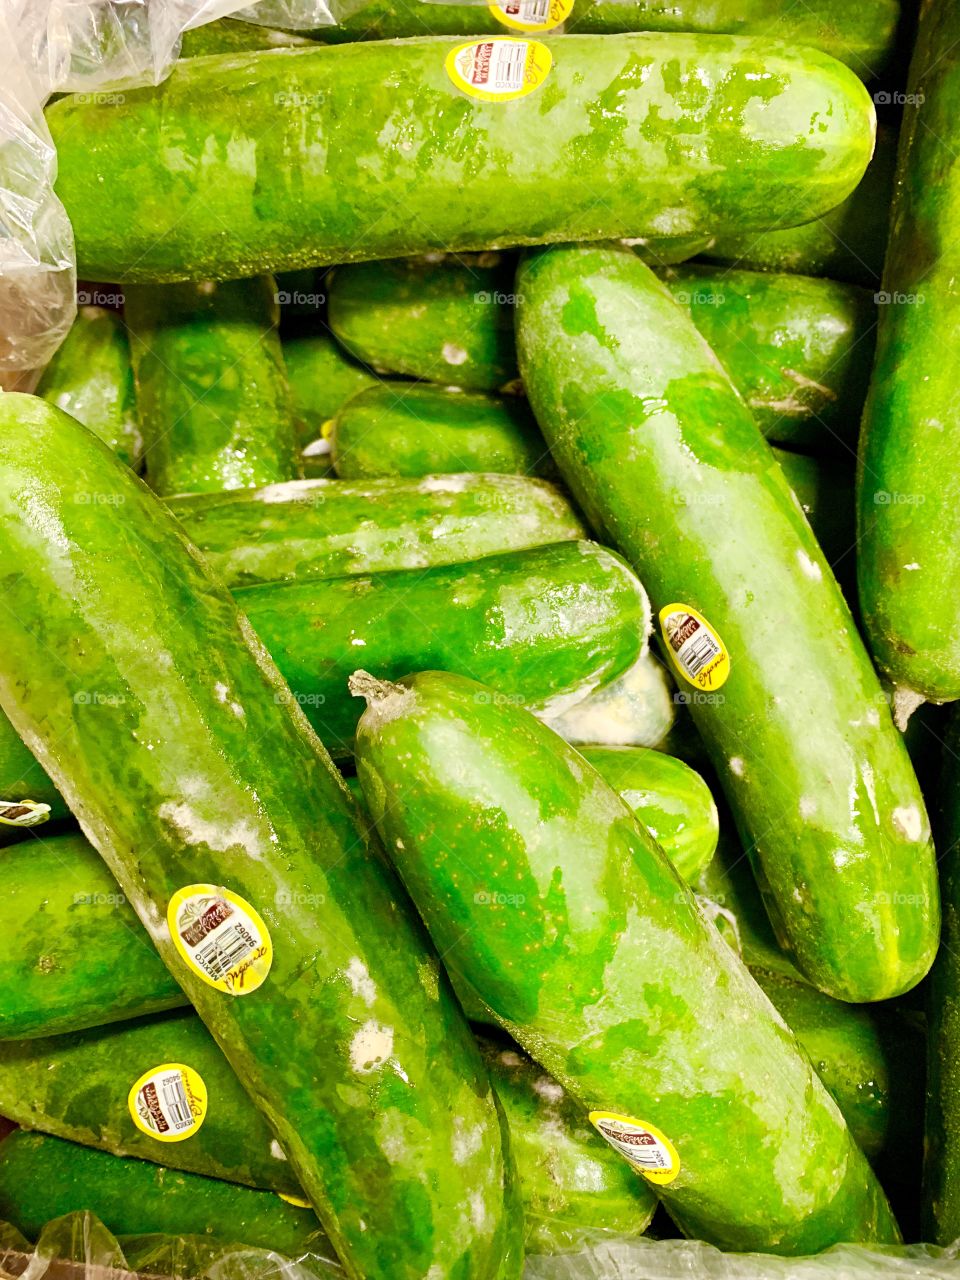 Cucumber moldy rotten product